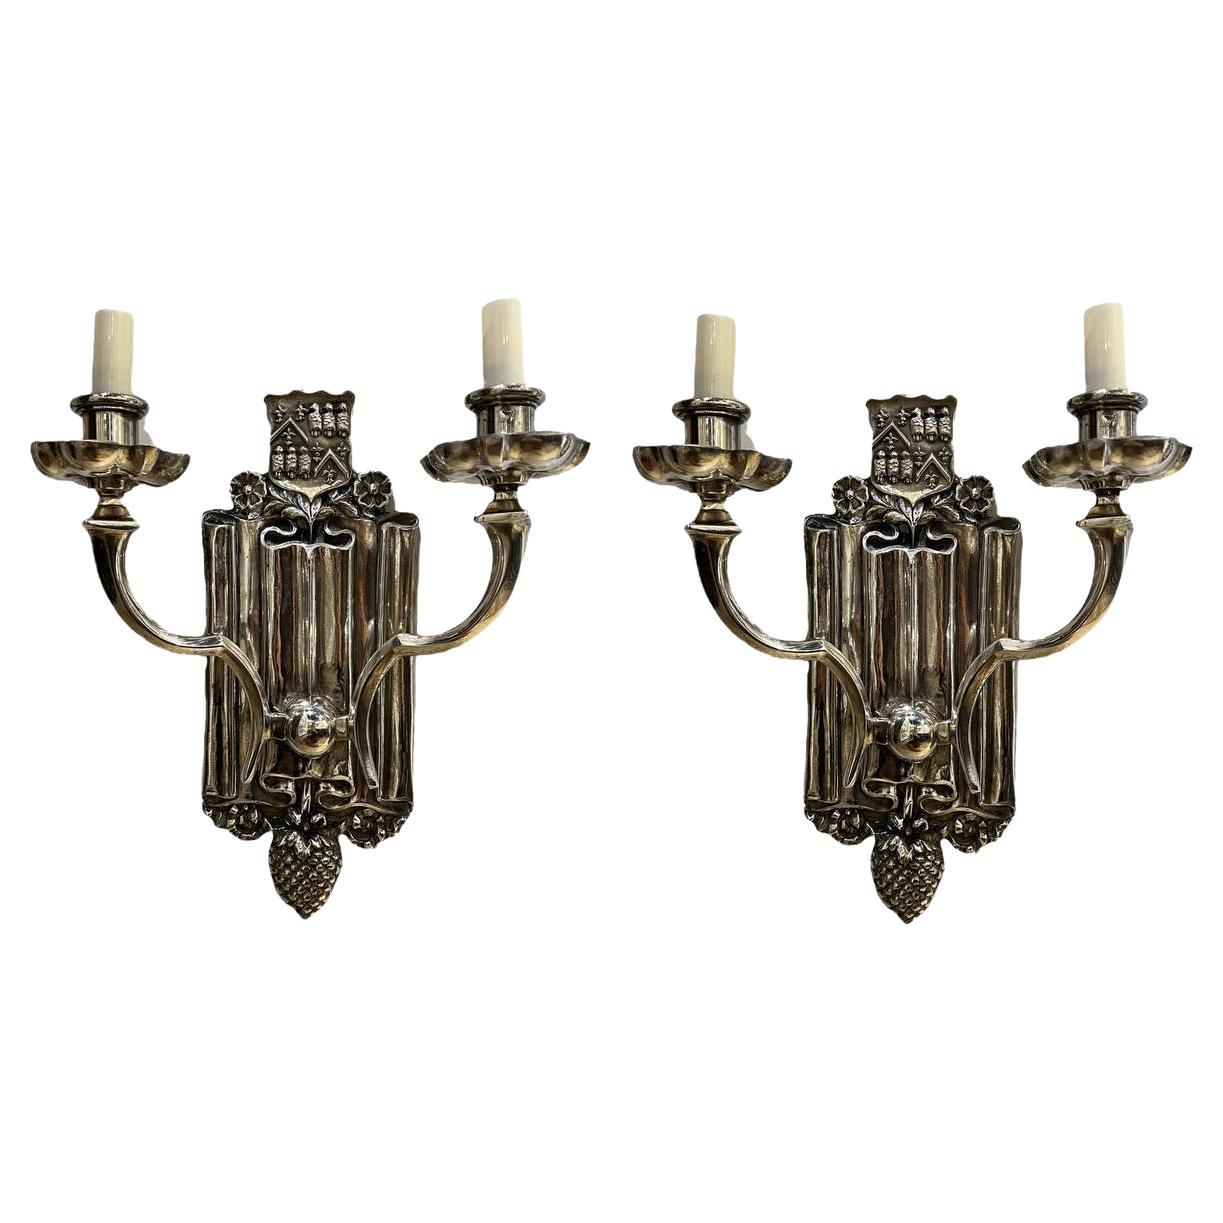 1920's Caldwell Silver Plated Sconces with Shield design 